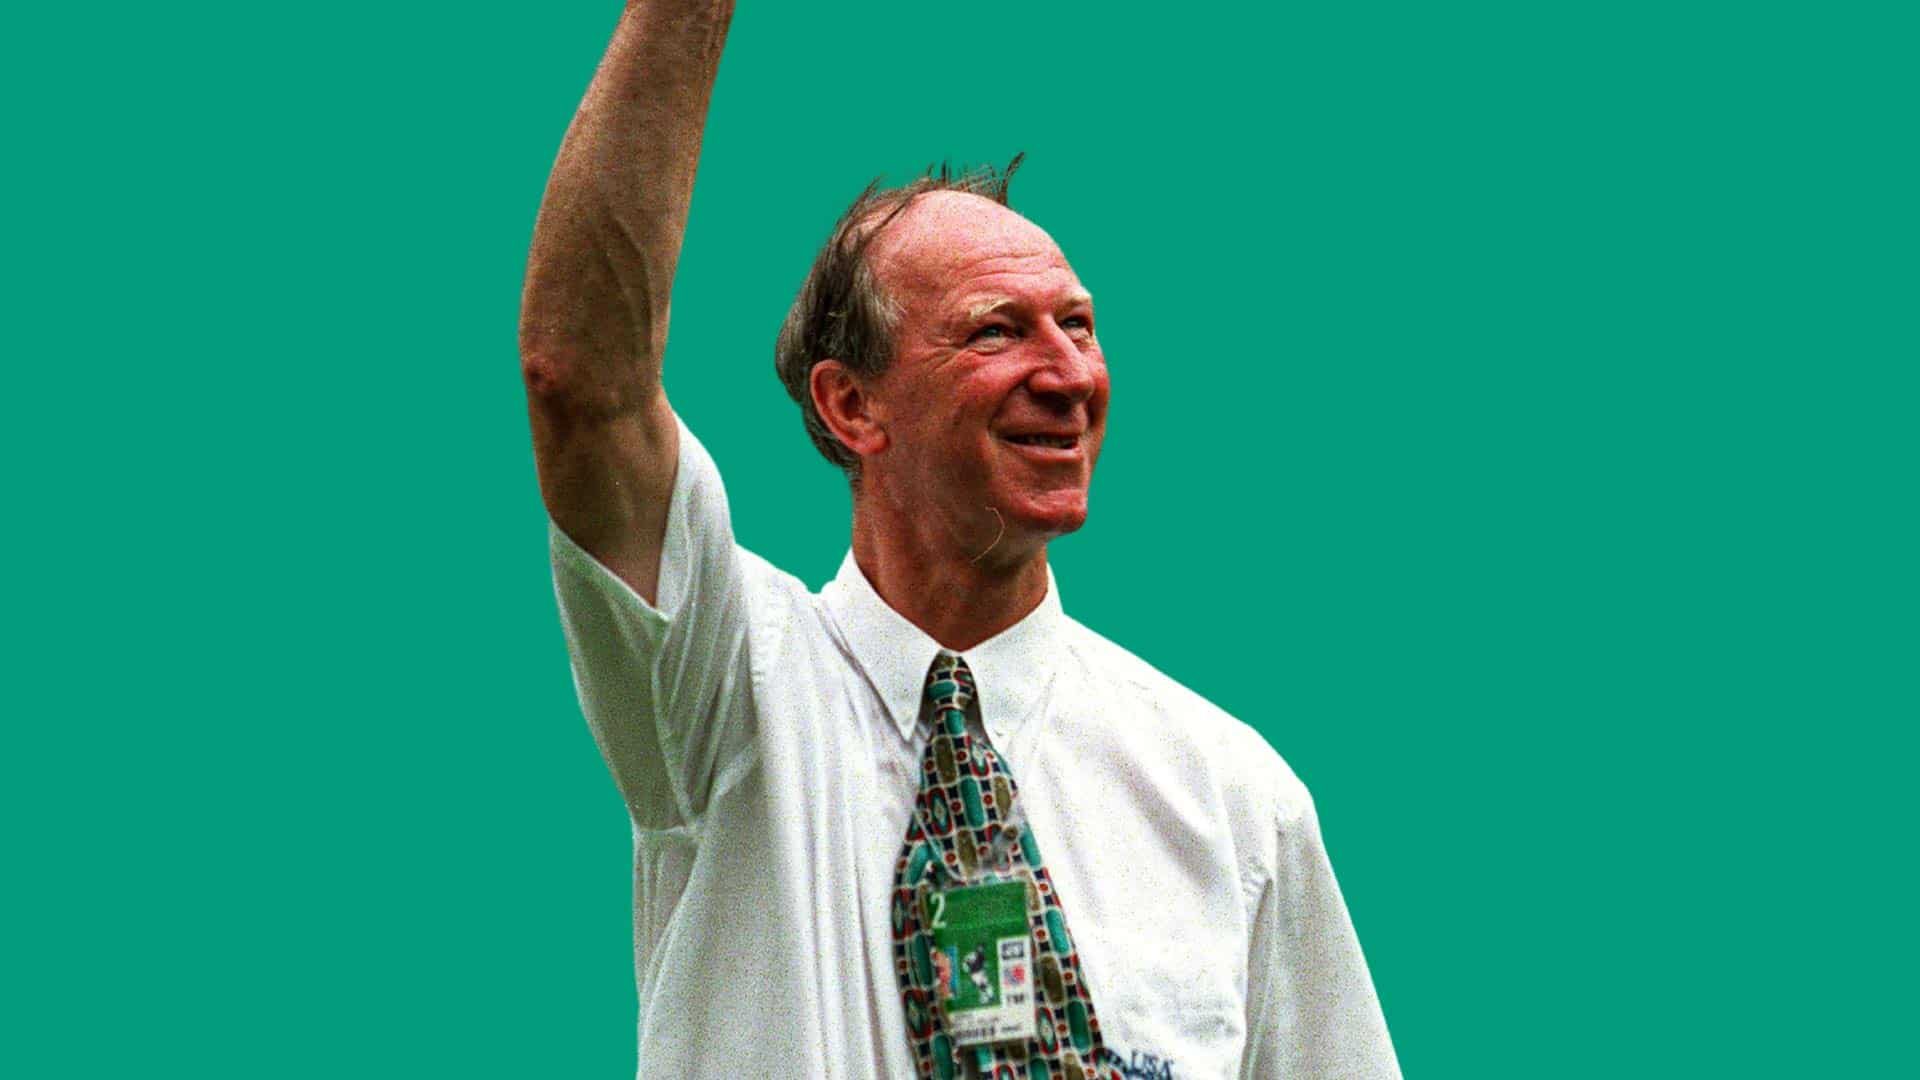 Jack Charlton waving and smiling at the 1994 World Cup